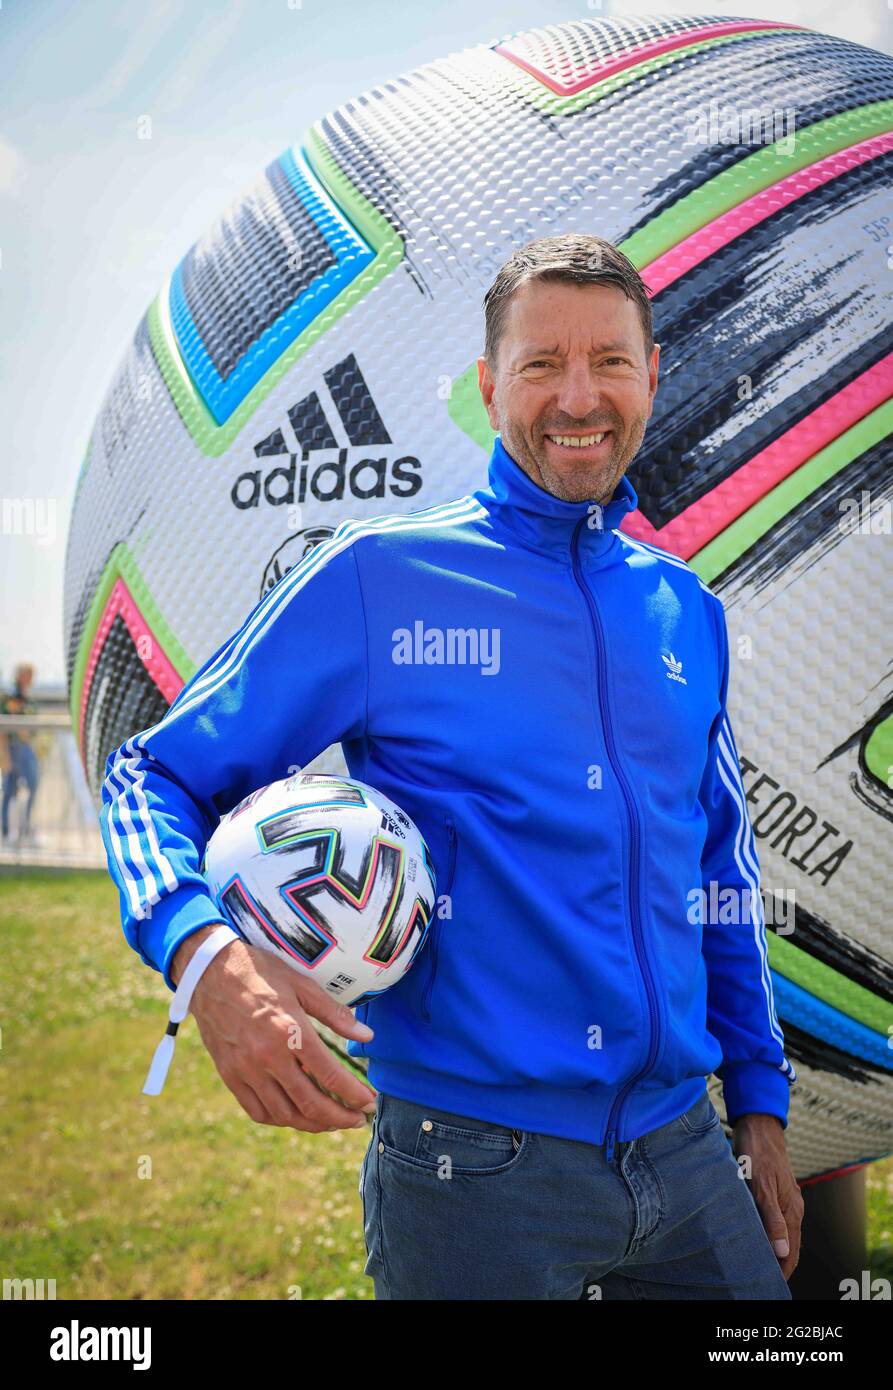 Herzogenaurach, Germany. 10th June, 2021. Kasper Rorsted, CEO of Adidas AG, stands during a brief photo session with official EURO 2020 match ball in front of the DFB media centre